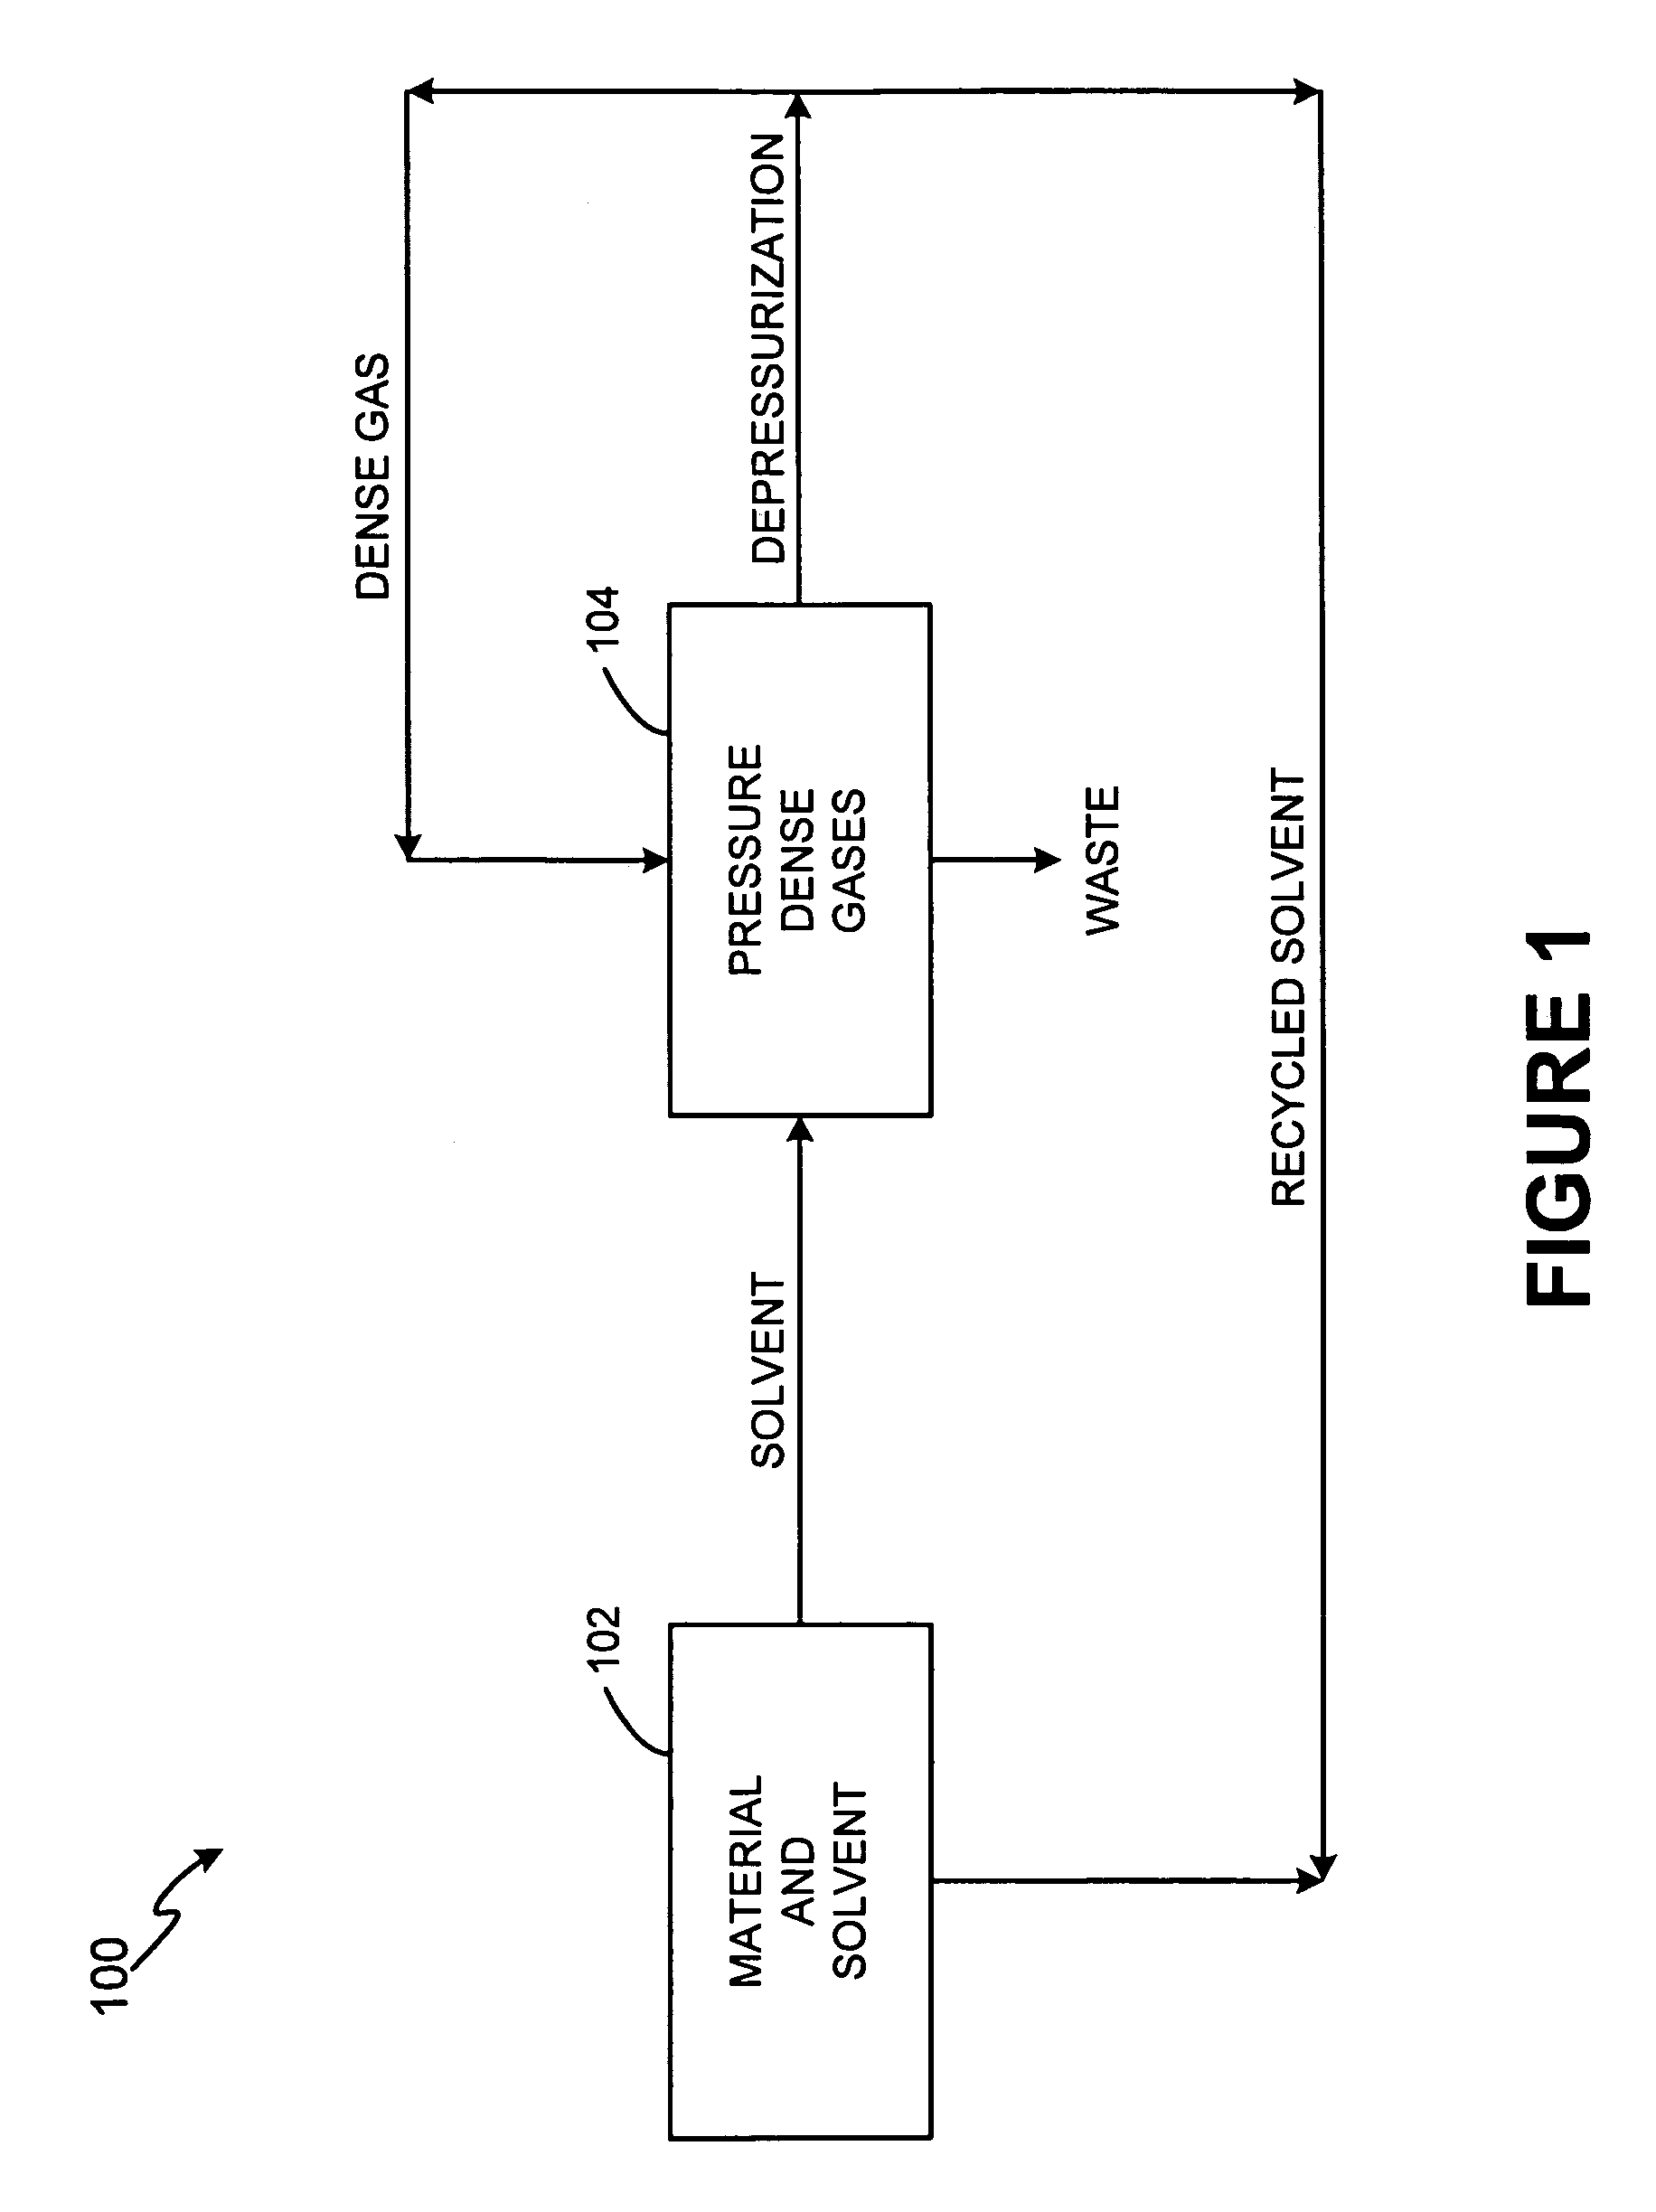 Composition for cleaning and degreasing, system for using the composition, and methods of forming and using the composition